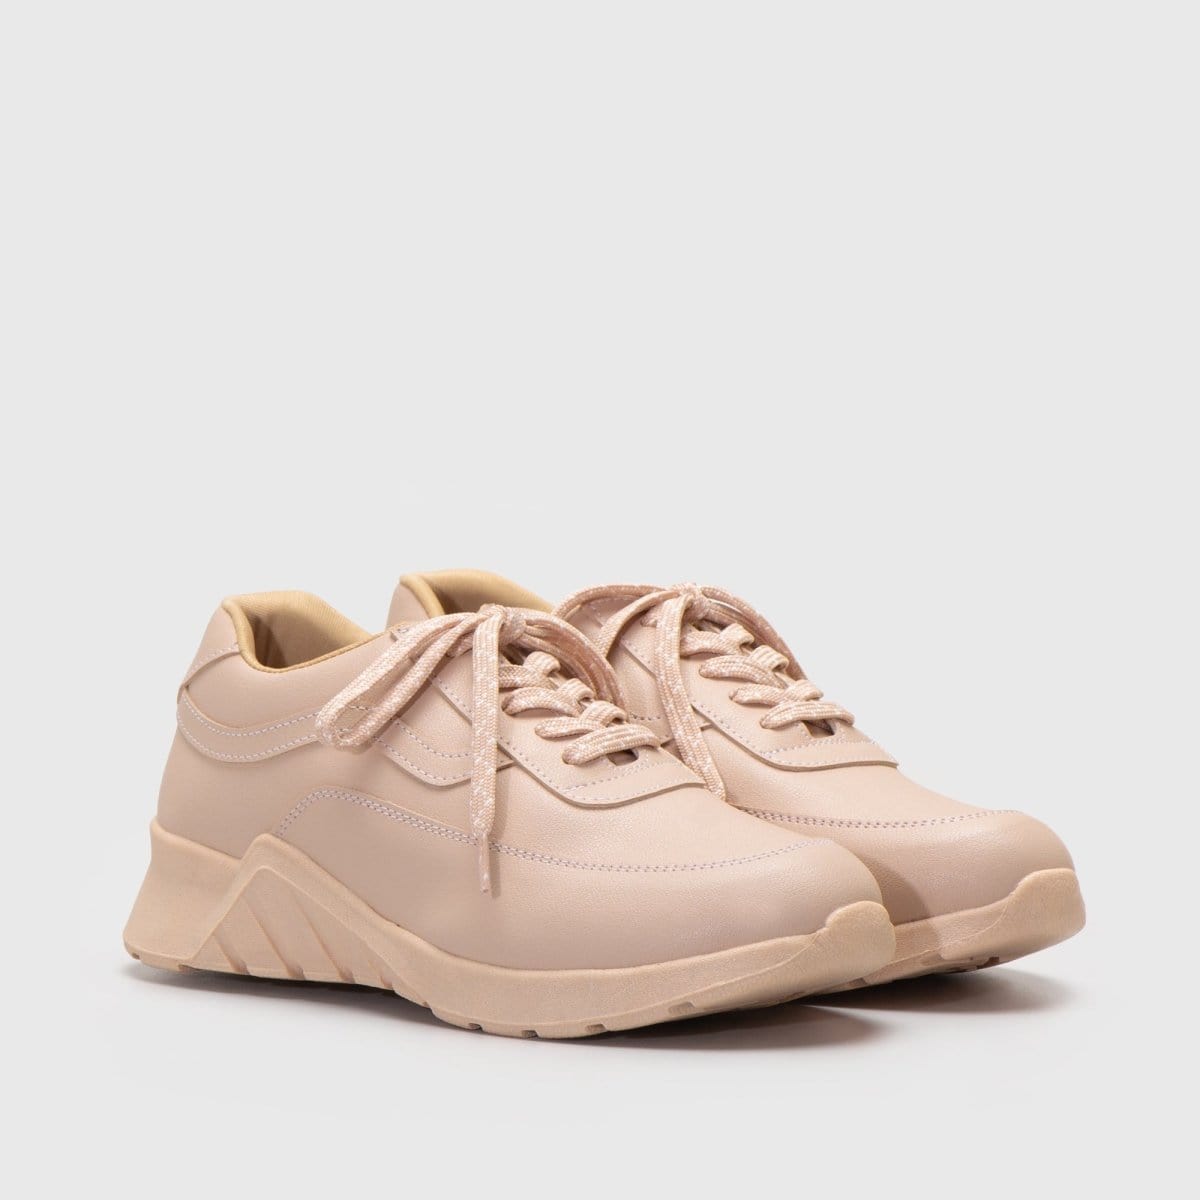 Adorable Projects Official Sneakers 39 / Peach Kikimora Sneakers Peach